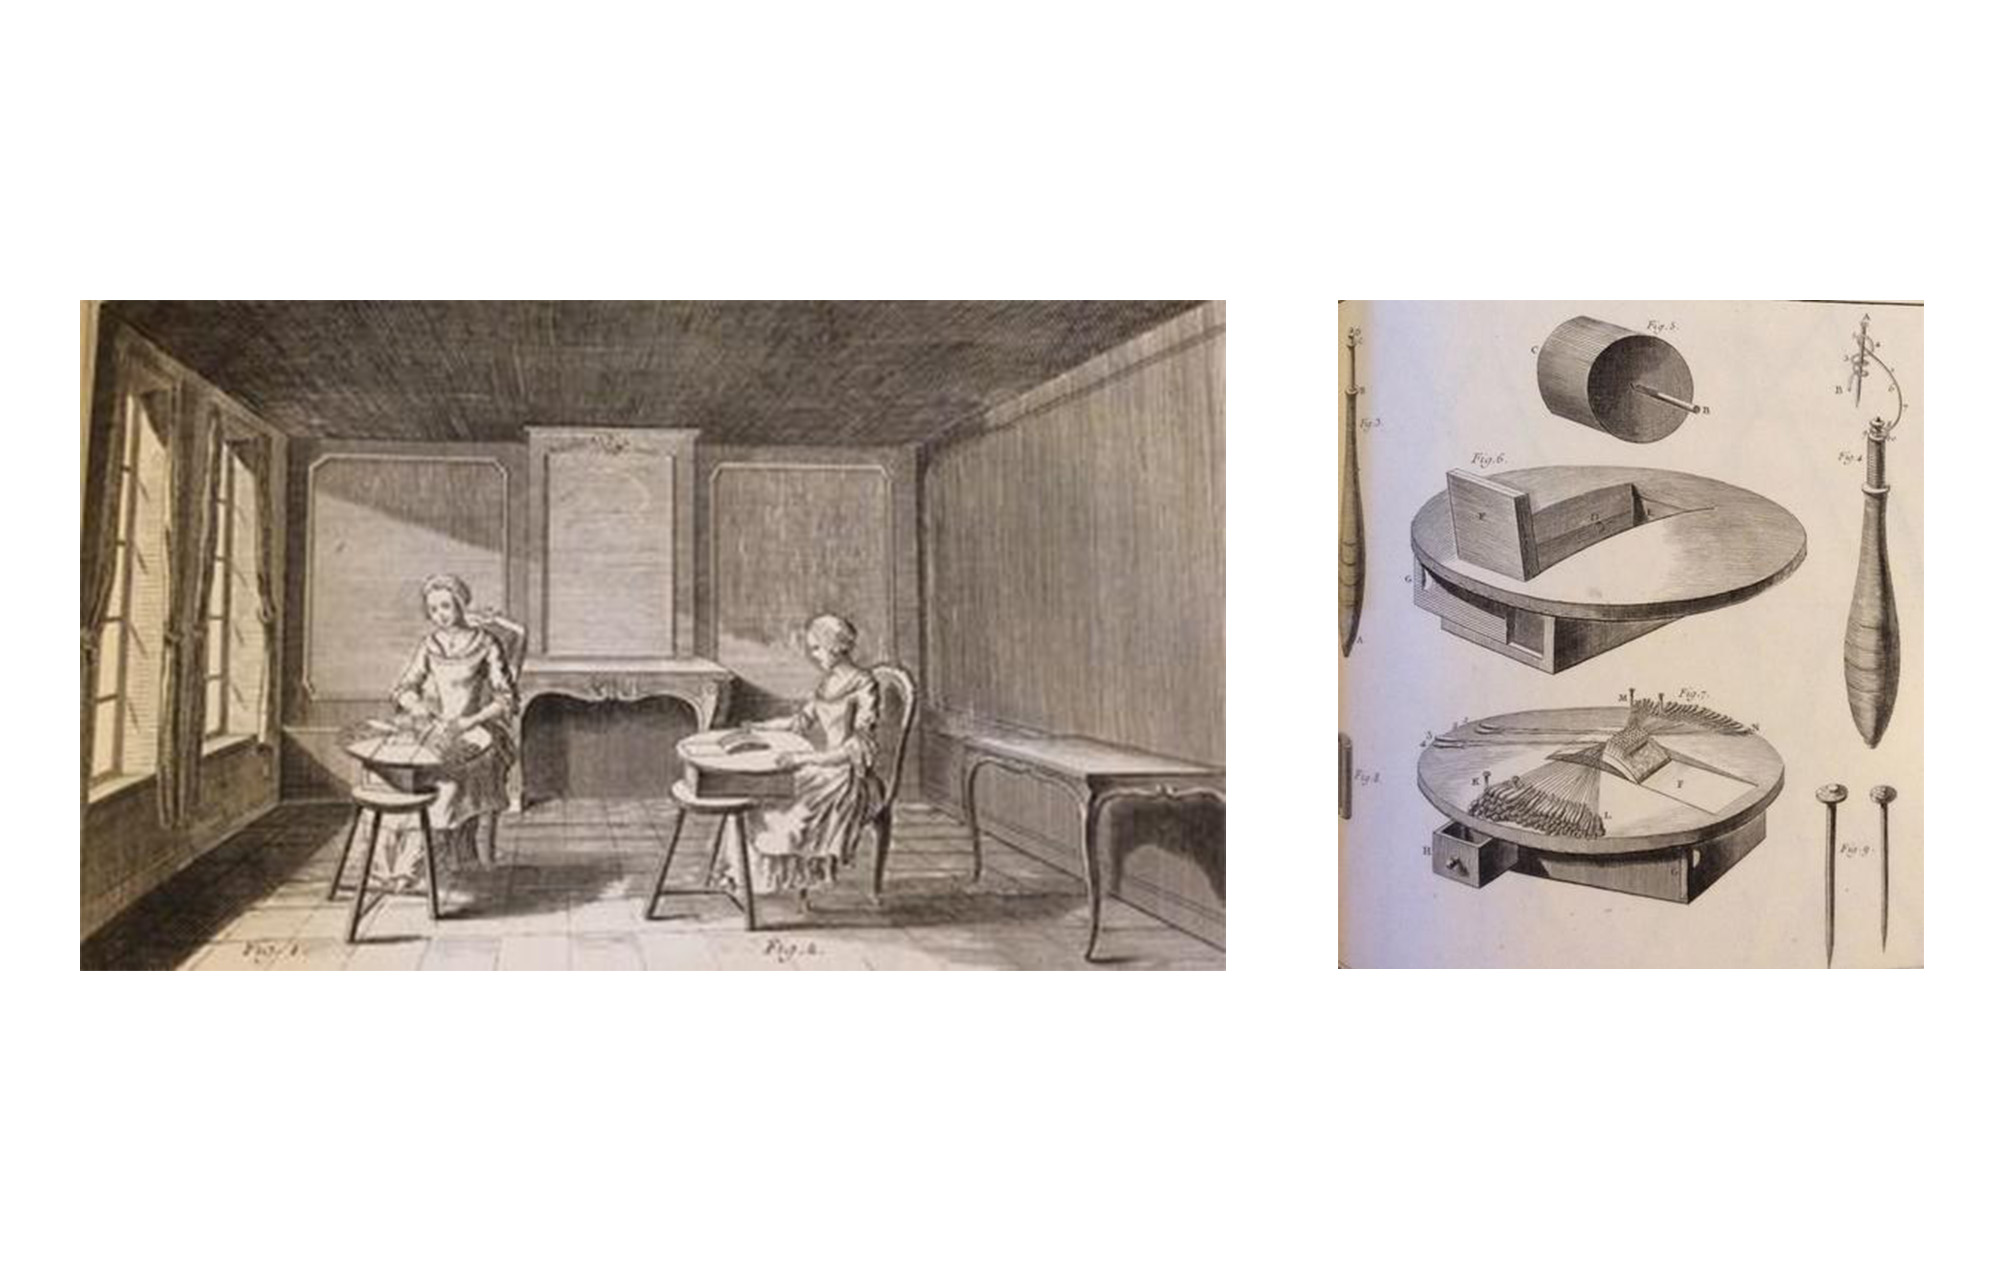 two images side by side. on the left, two women sit at chairs making lace on forms; on the right, a diagram of various lace-making tools